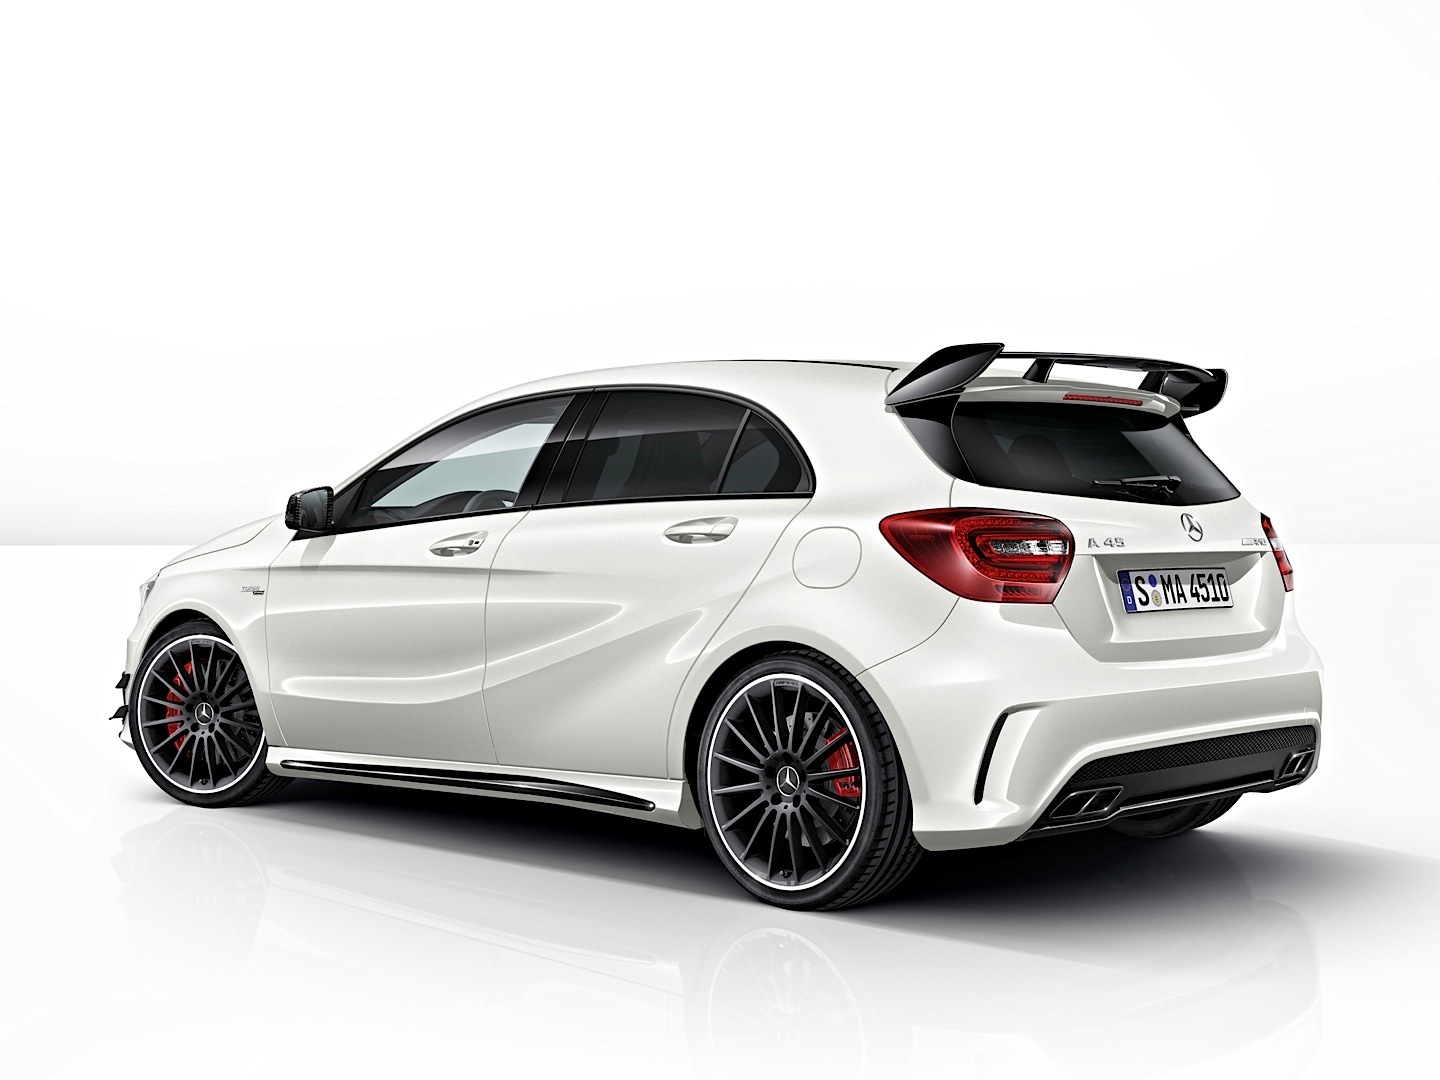 Mercedes Benz A 45 Amg Gets Priced In Malaysia Autoevolution